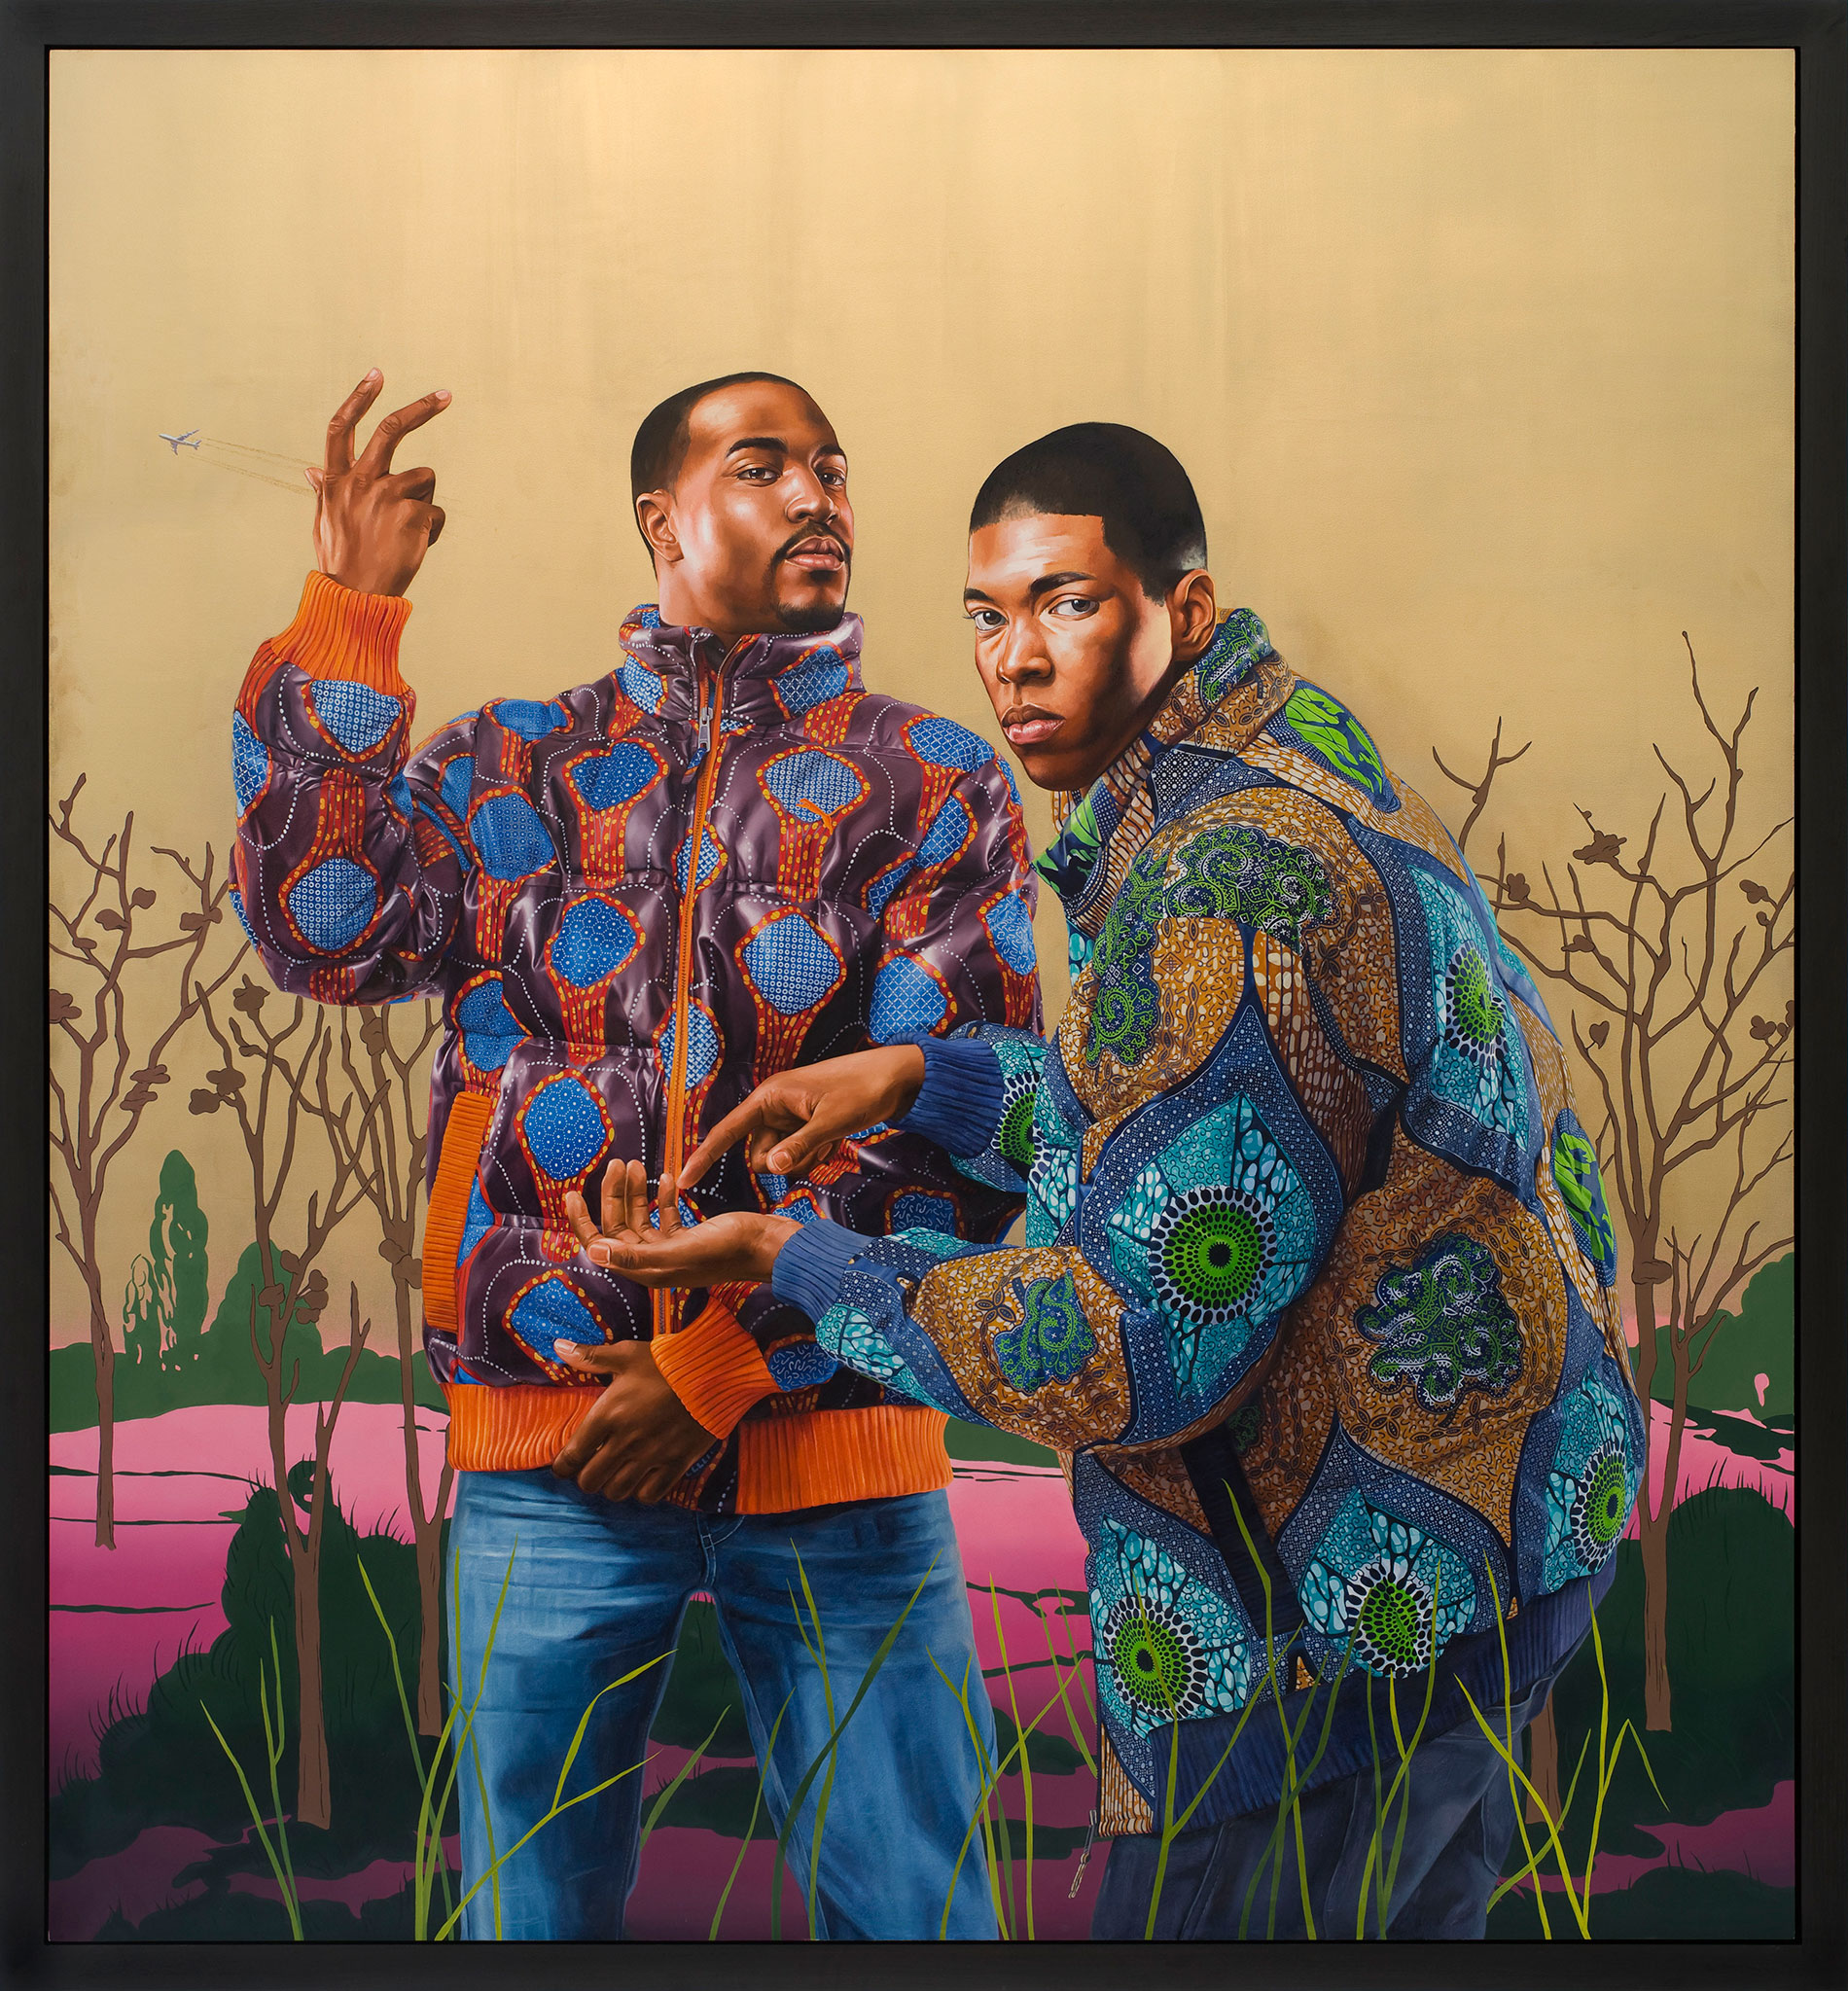 Kehinde Wiley | Selected Works: 2011 | The Tribute Money, 2011 Oil on Canvas.  | 8